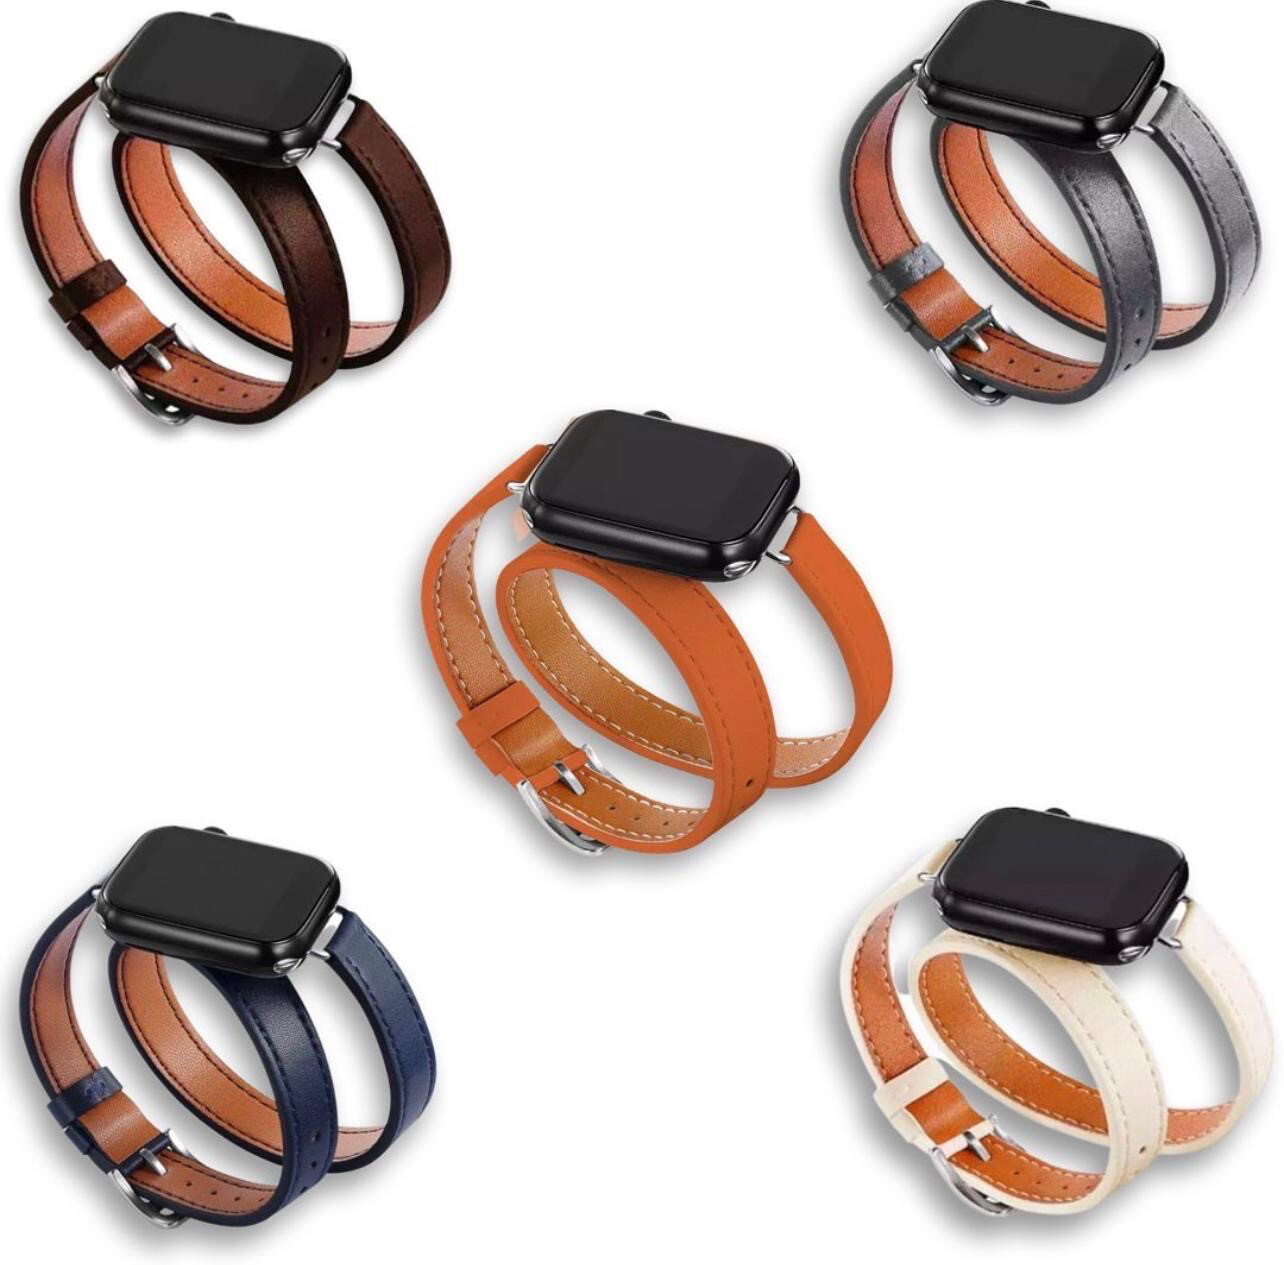 Women's Apple Watch strap that wraps on the hands (slim) for all sizes, in distinctive colors